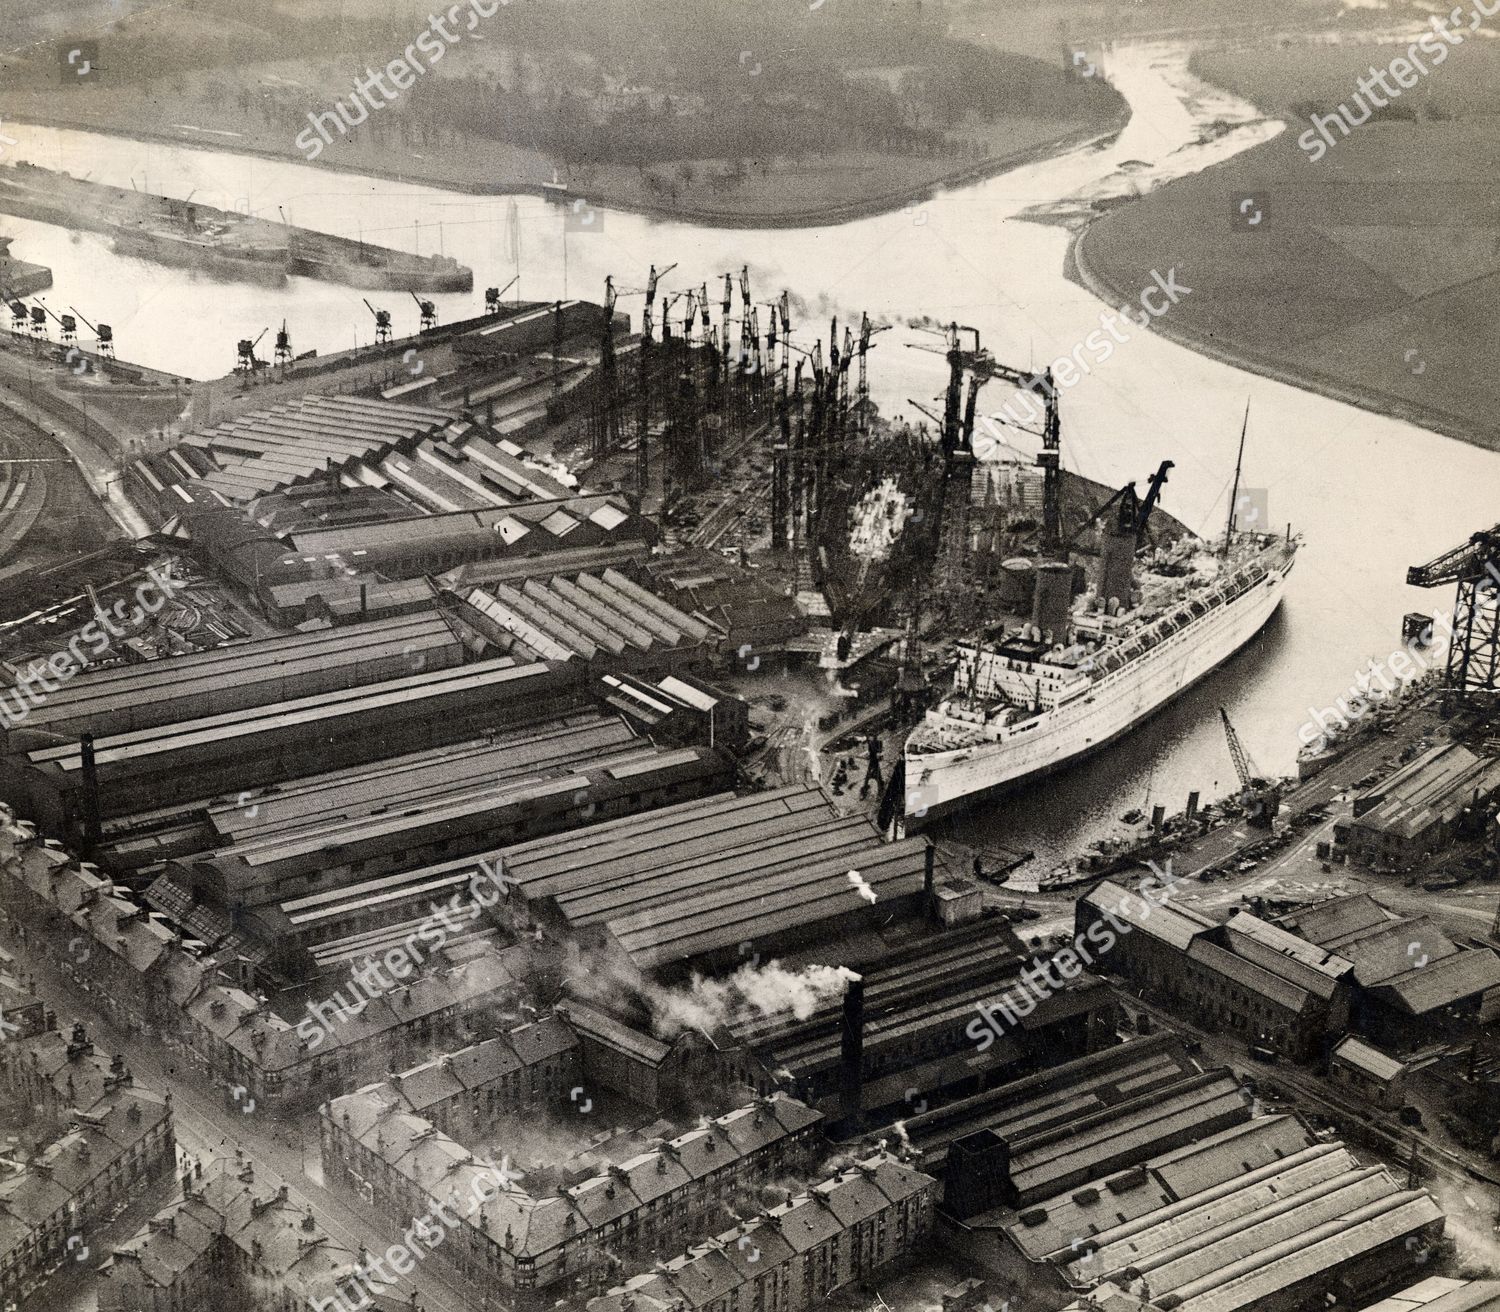 aerial-view-of-john-brown-co-ltd-shipyard-at-clydebank-liner-probably-the-empress-of-britain-is-having-its-third-funnel-fitted-alongside-two-navy-vessels-shutterstock-editorial-1105930a.jpg